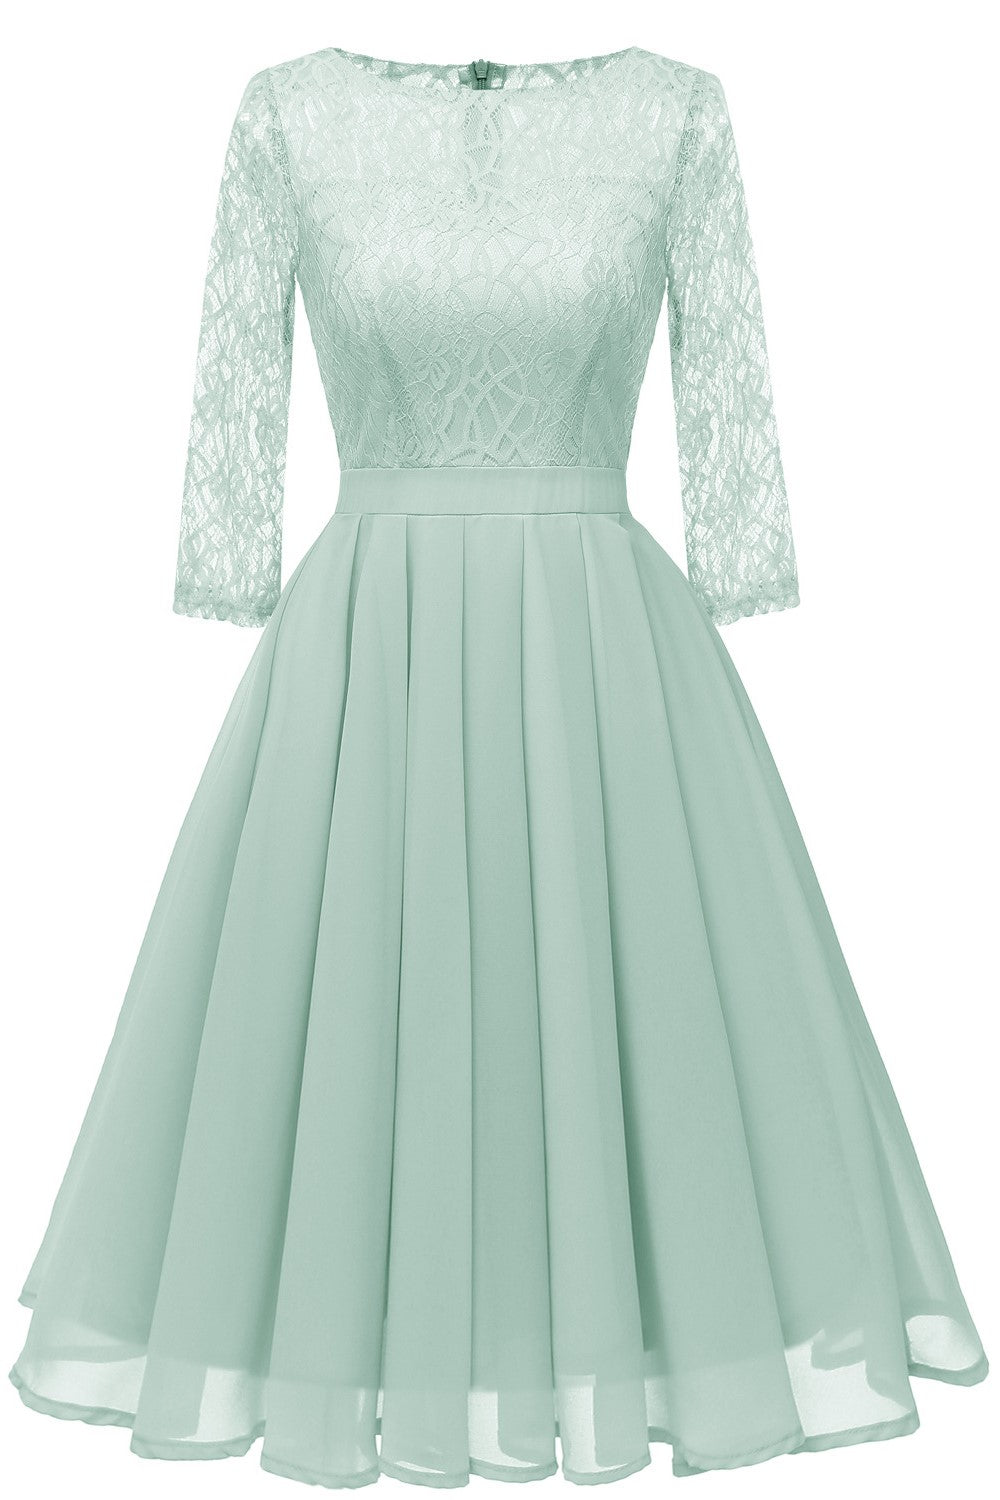 Mint Green Chiffon Lace Wedding Party Dress with Sleeves – loveangeldress